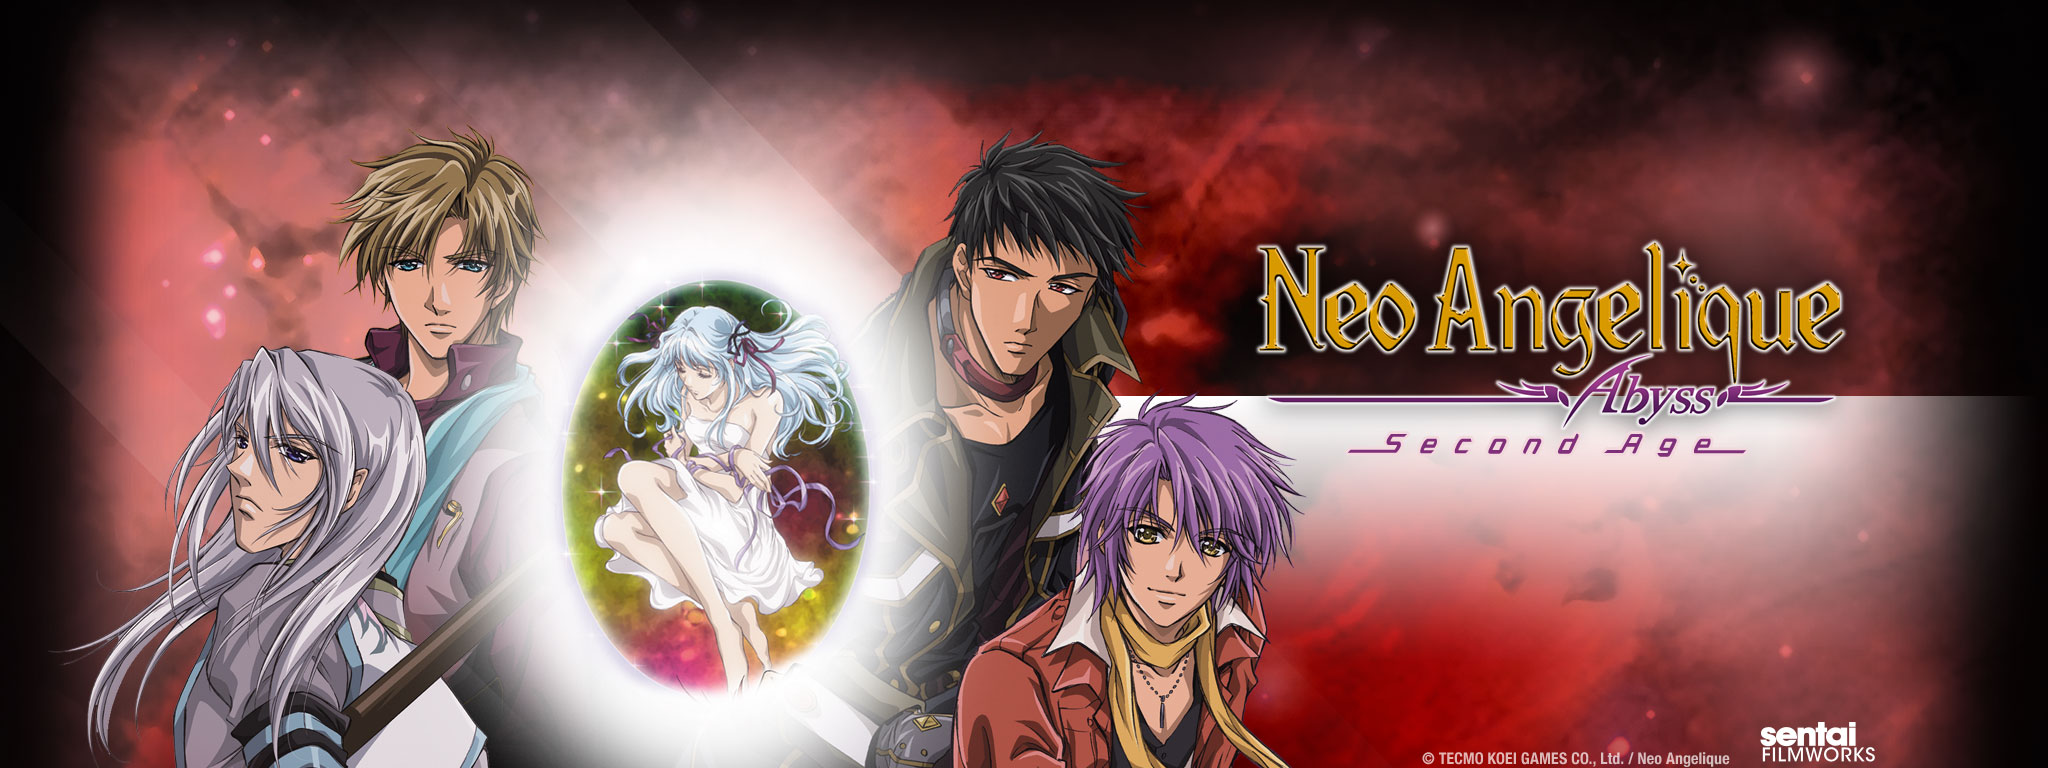 Title Art for Neo Angelique Abyss -Second Age-